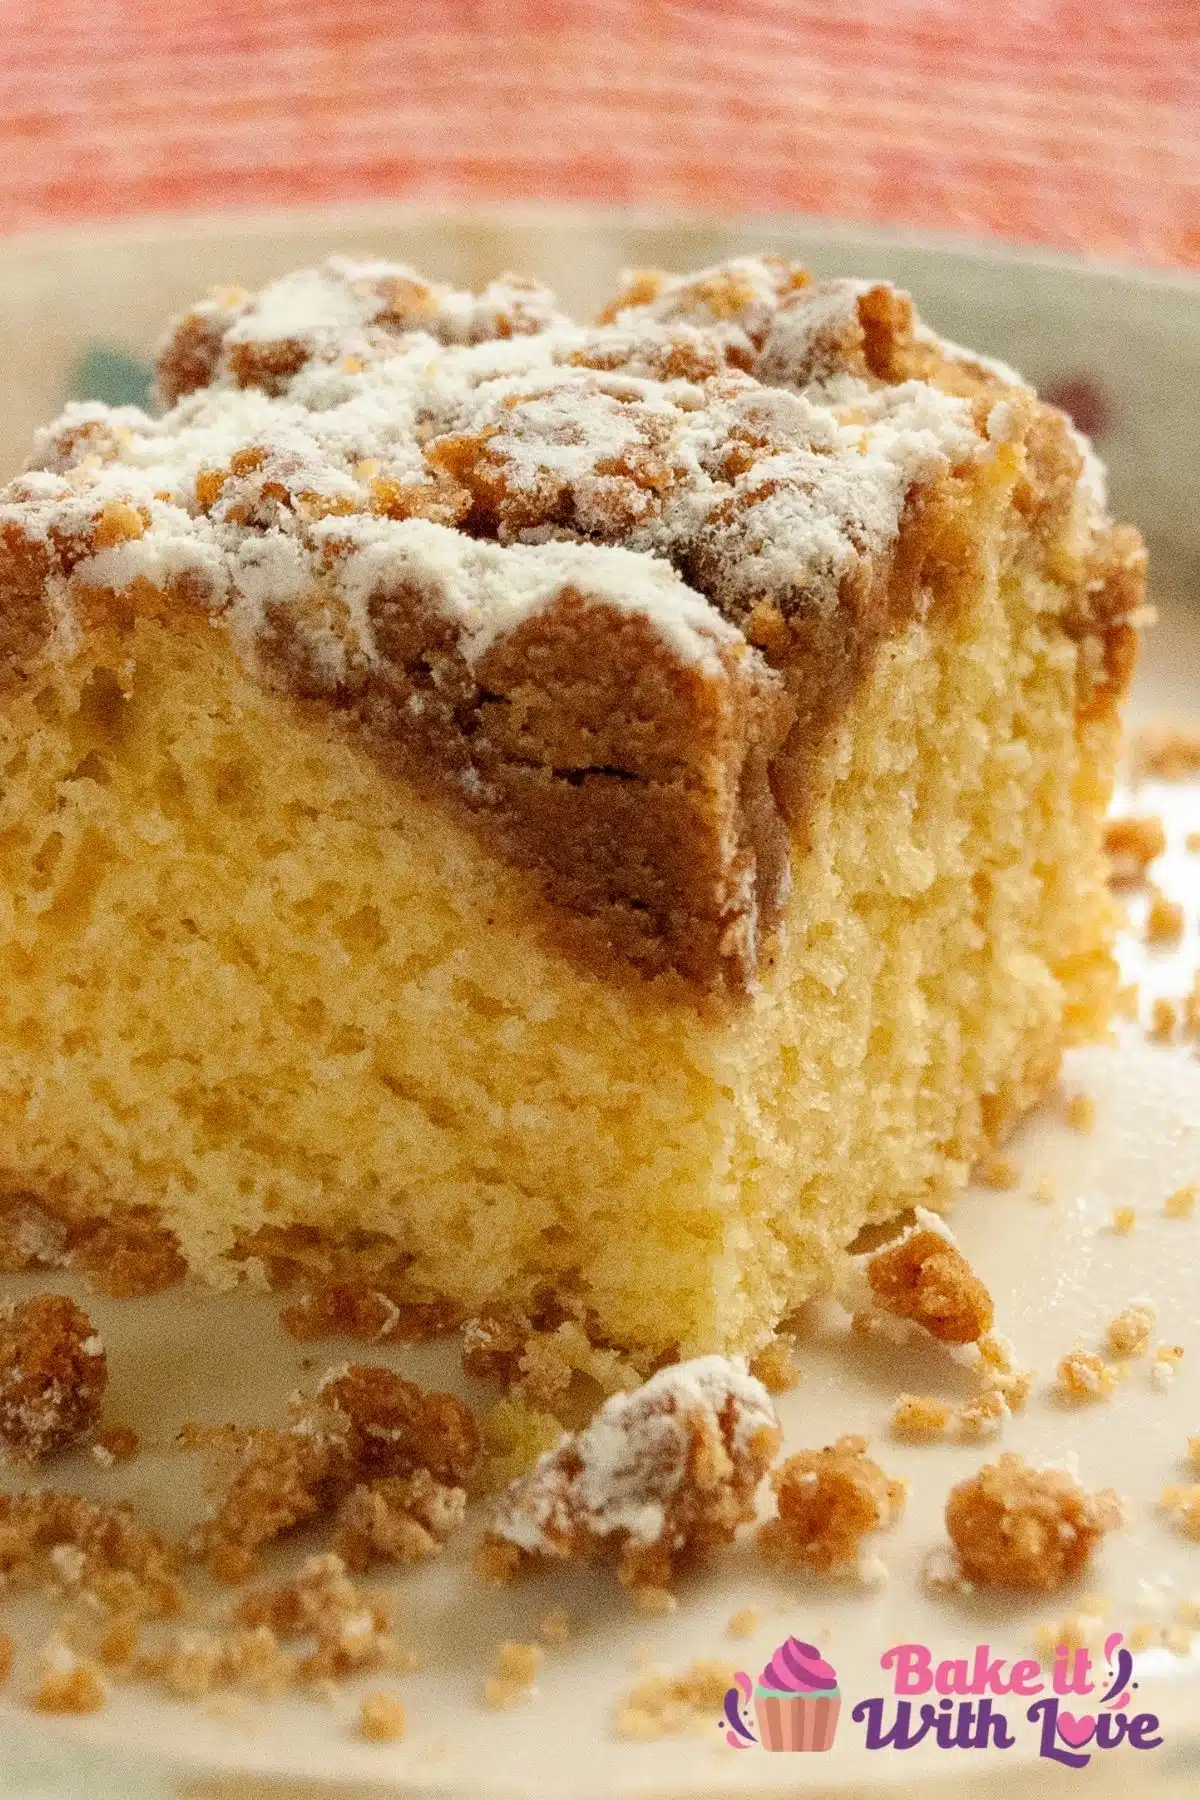 Tall closeup image of the sliced Bisquick coffee cake.